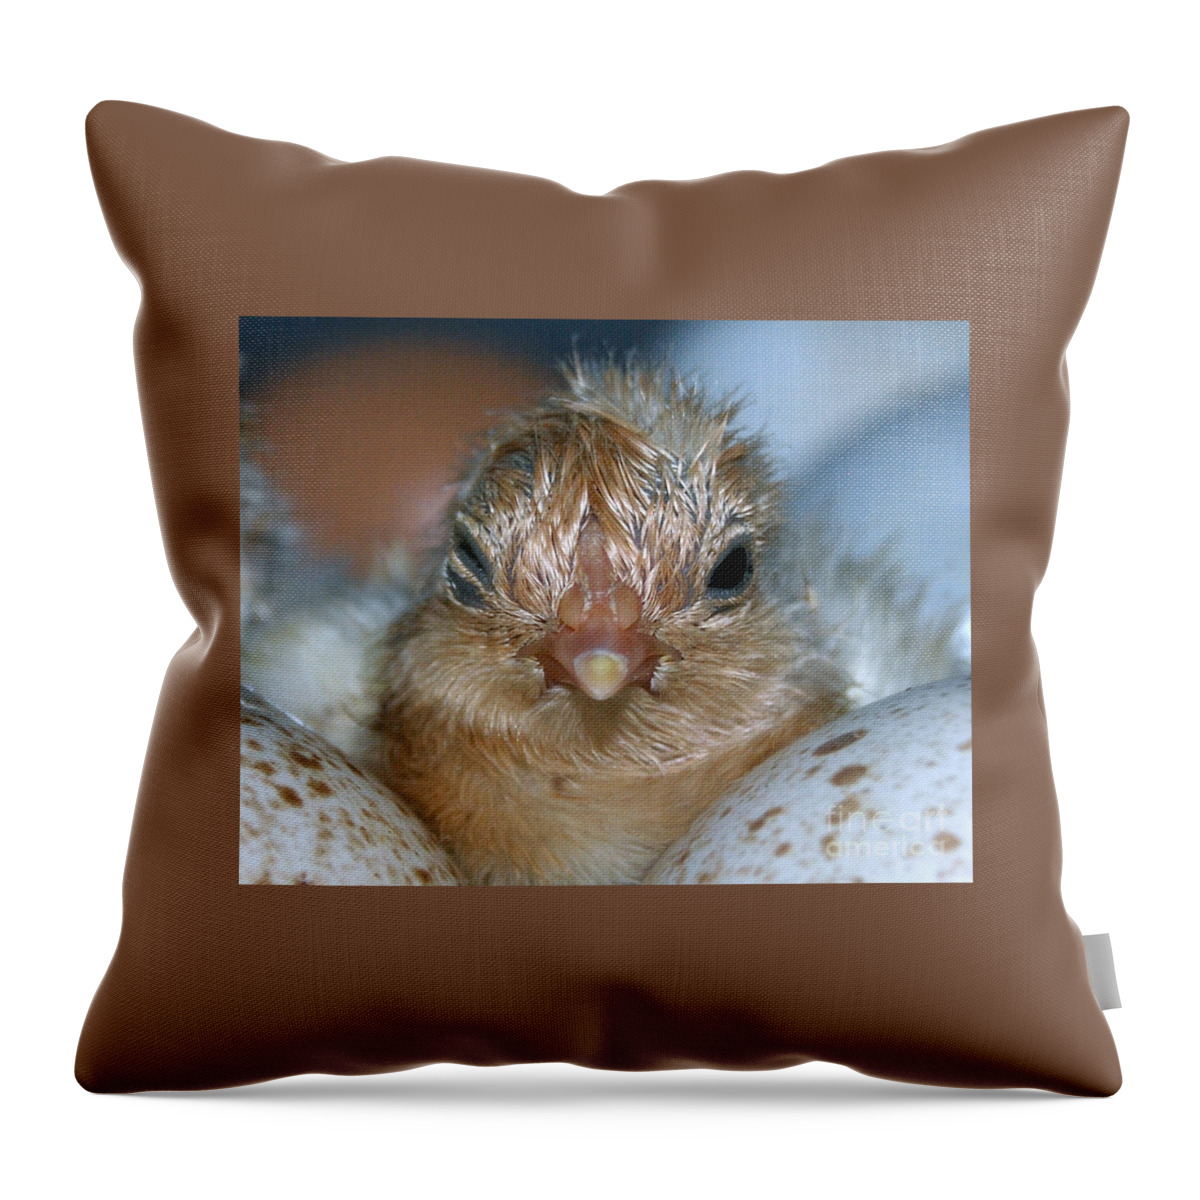 Hatched Throw Pillow featuring the photograph Just Hatched by Grace Grogan